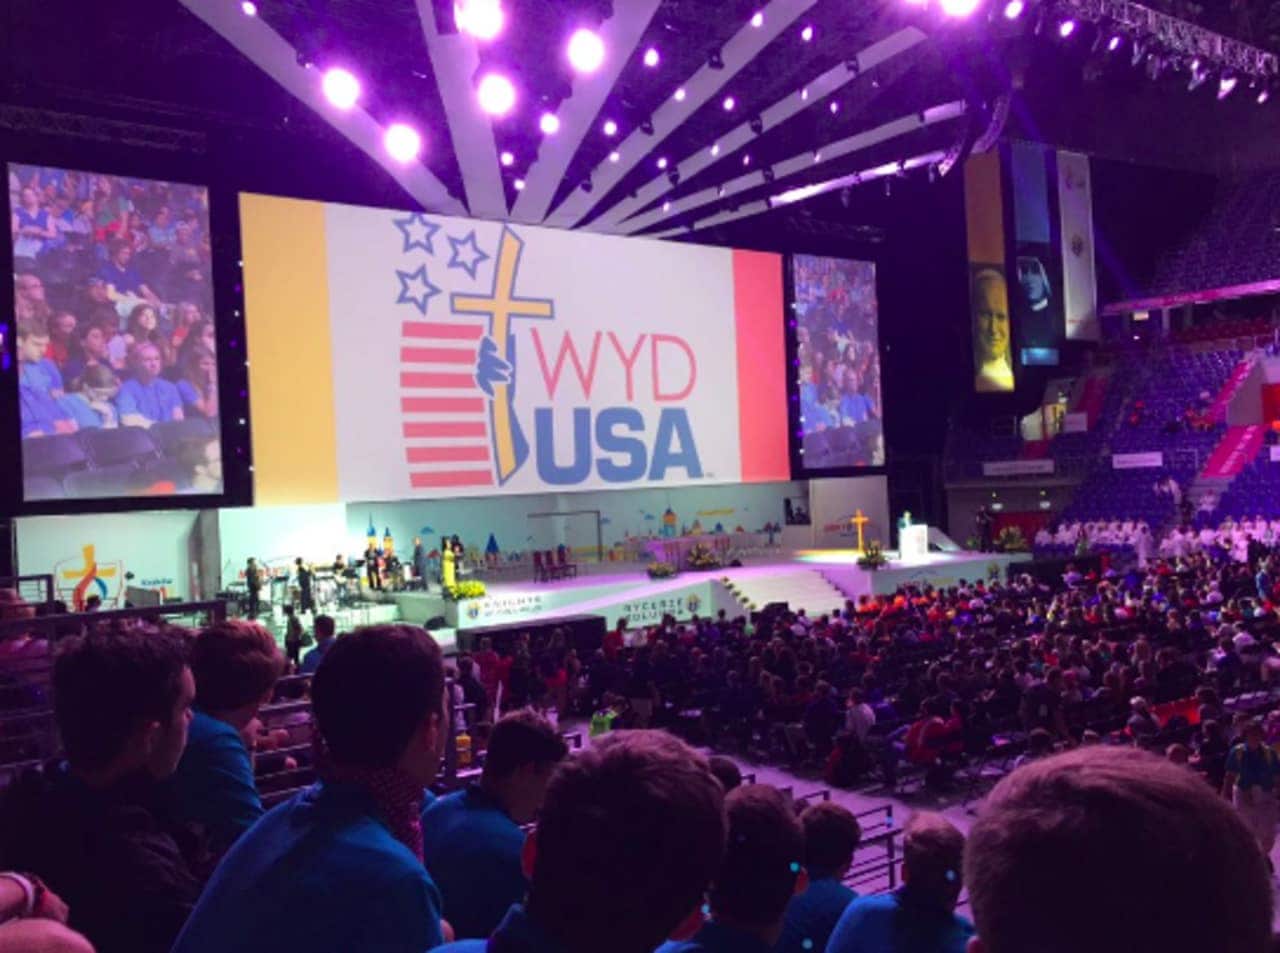 World Youth Day drew more than a million young Catholics on a pilgrimage of prayer and friendship with Pope France. The event takes place every two to three years in different locations around the world. Youth Day 2016 was held in Krakow, Poland.